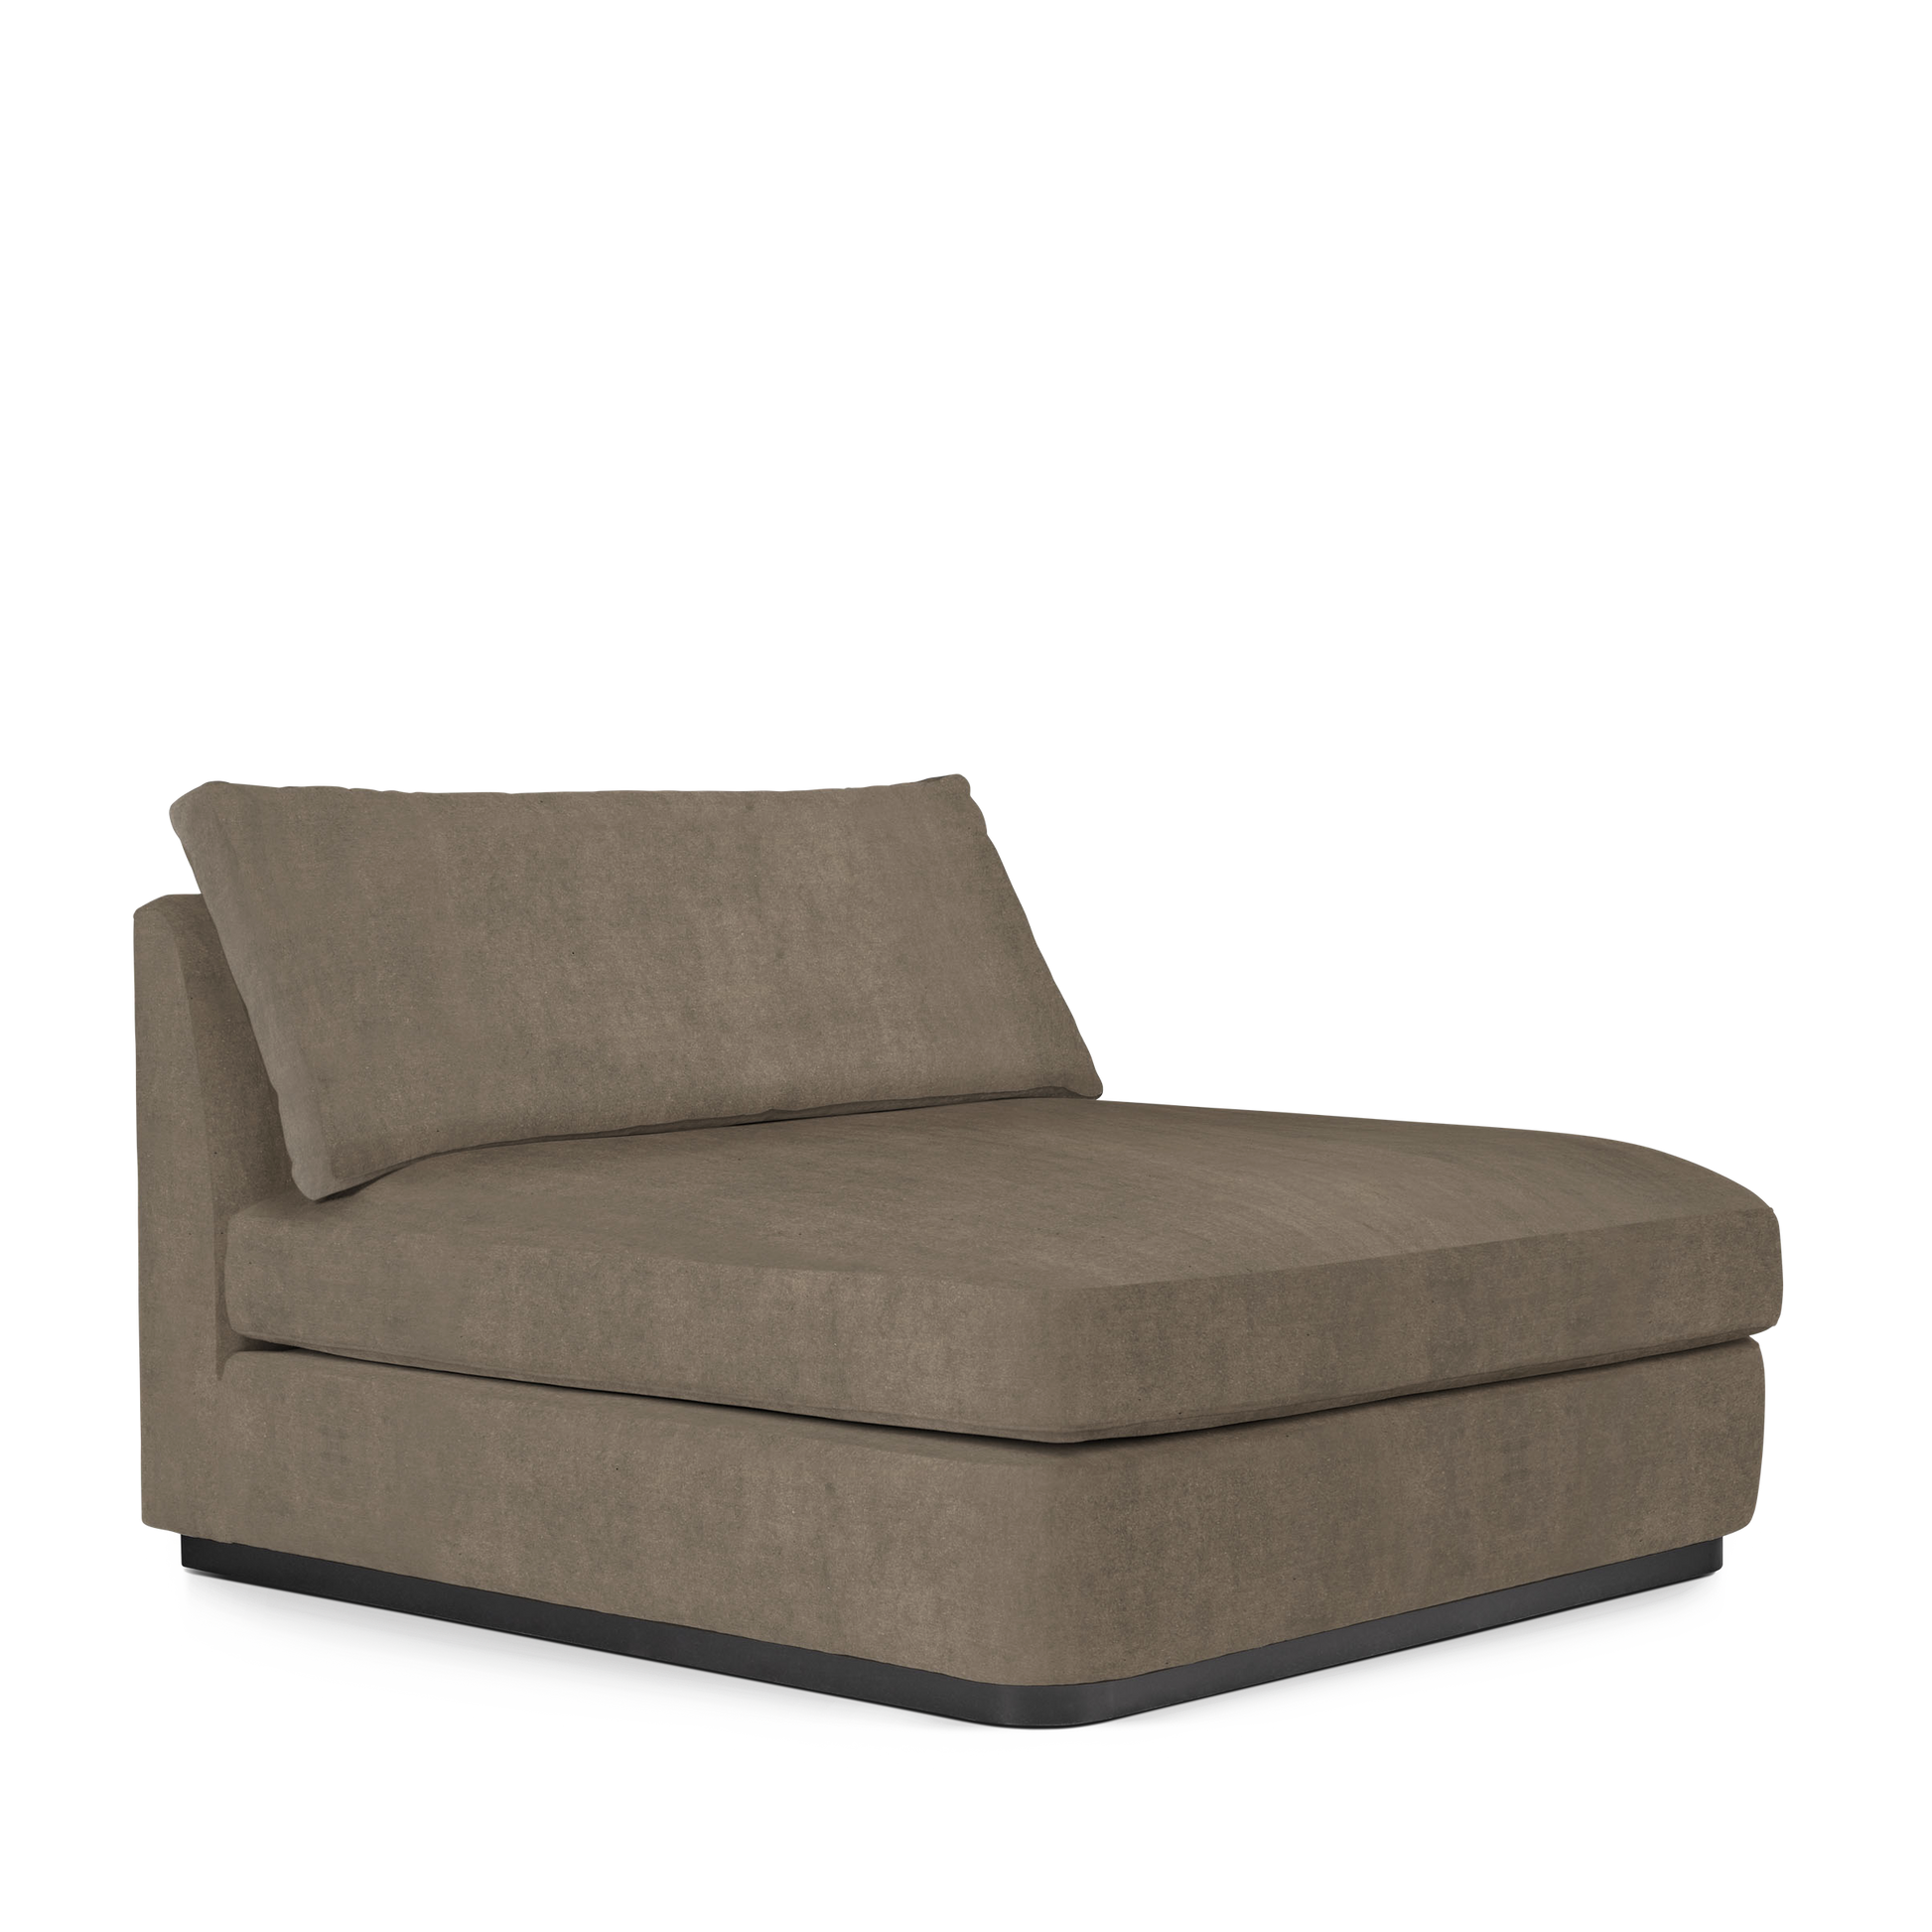 CALMA Lounge Bed with suede grey textile 